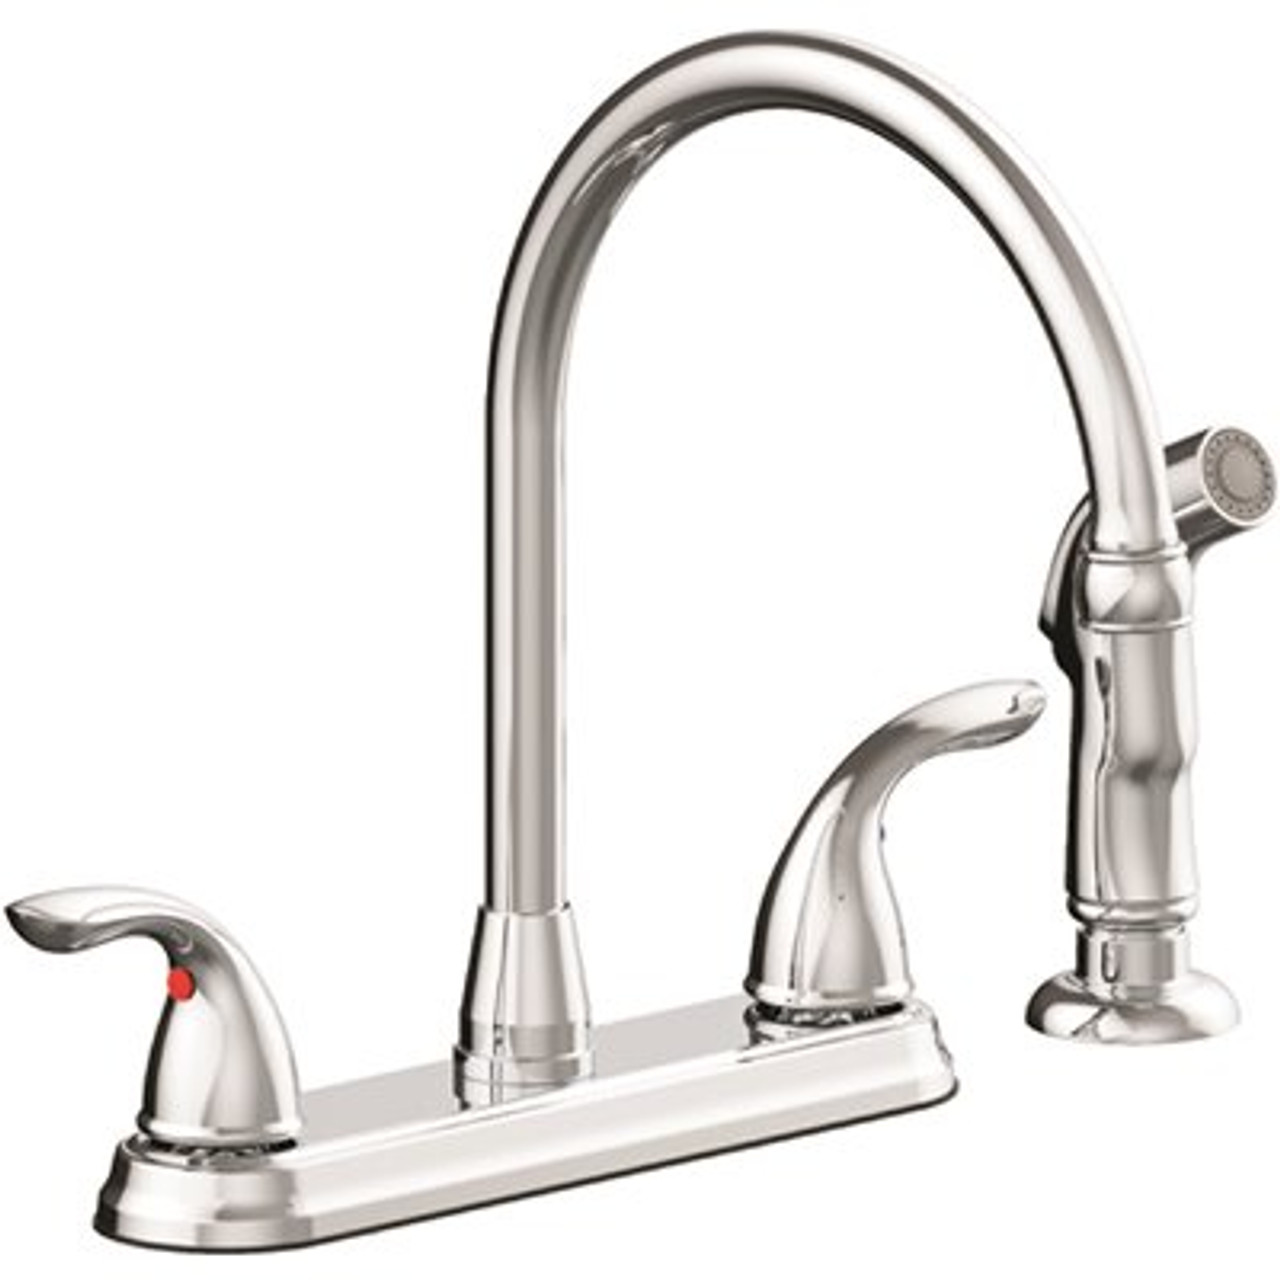 Seasons Westlake Double-Handle Kitchen Faucet with Side Sprayer in Chrome